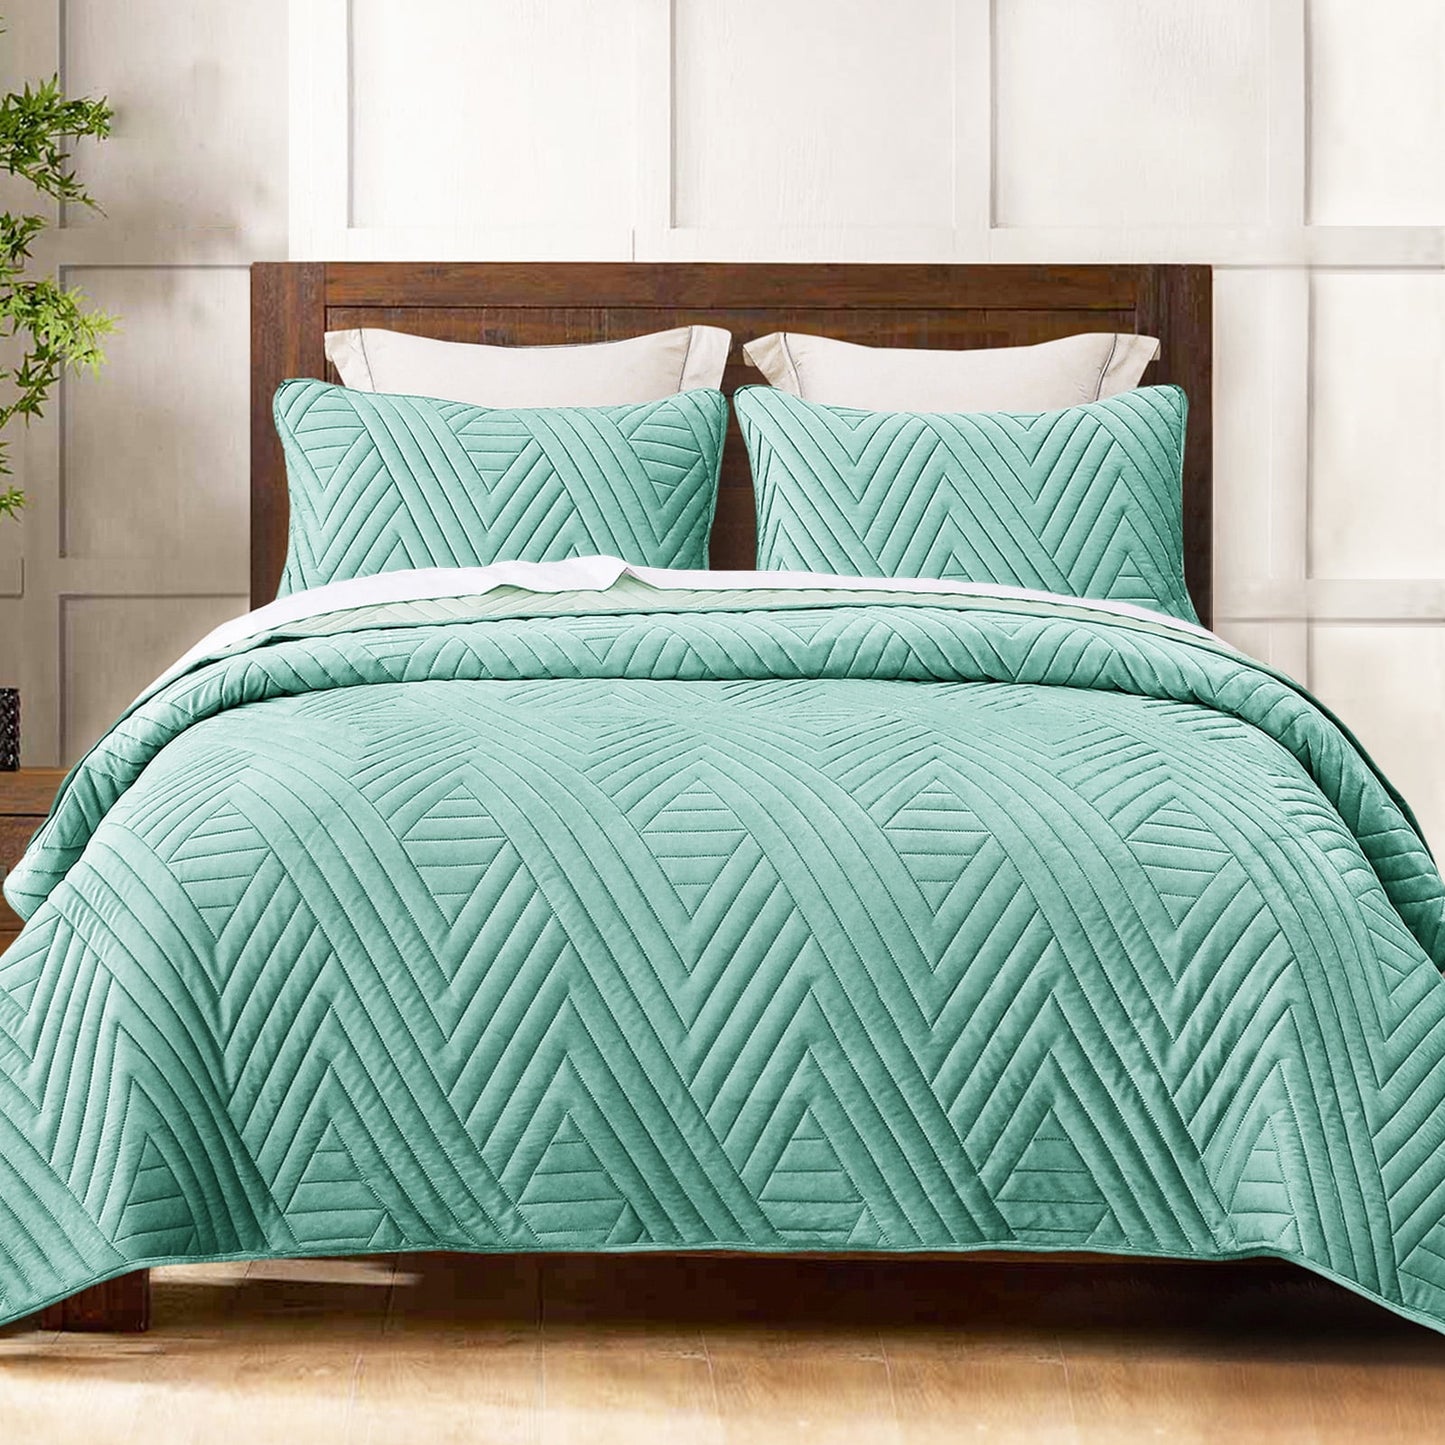 Exclusivo Mezcla Super Plush Velvet Quilt King Size with Pillow Shams, Luxury Soft Reversible 3 Piece Bedspreads Coverlet Comforter set for all seasons, Lightweight and Warm, Aqua Green